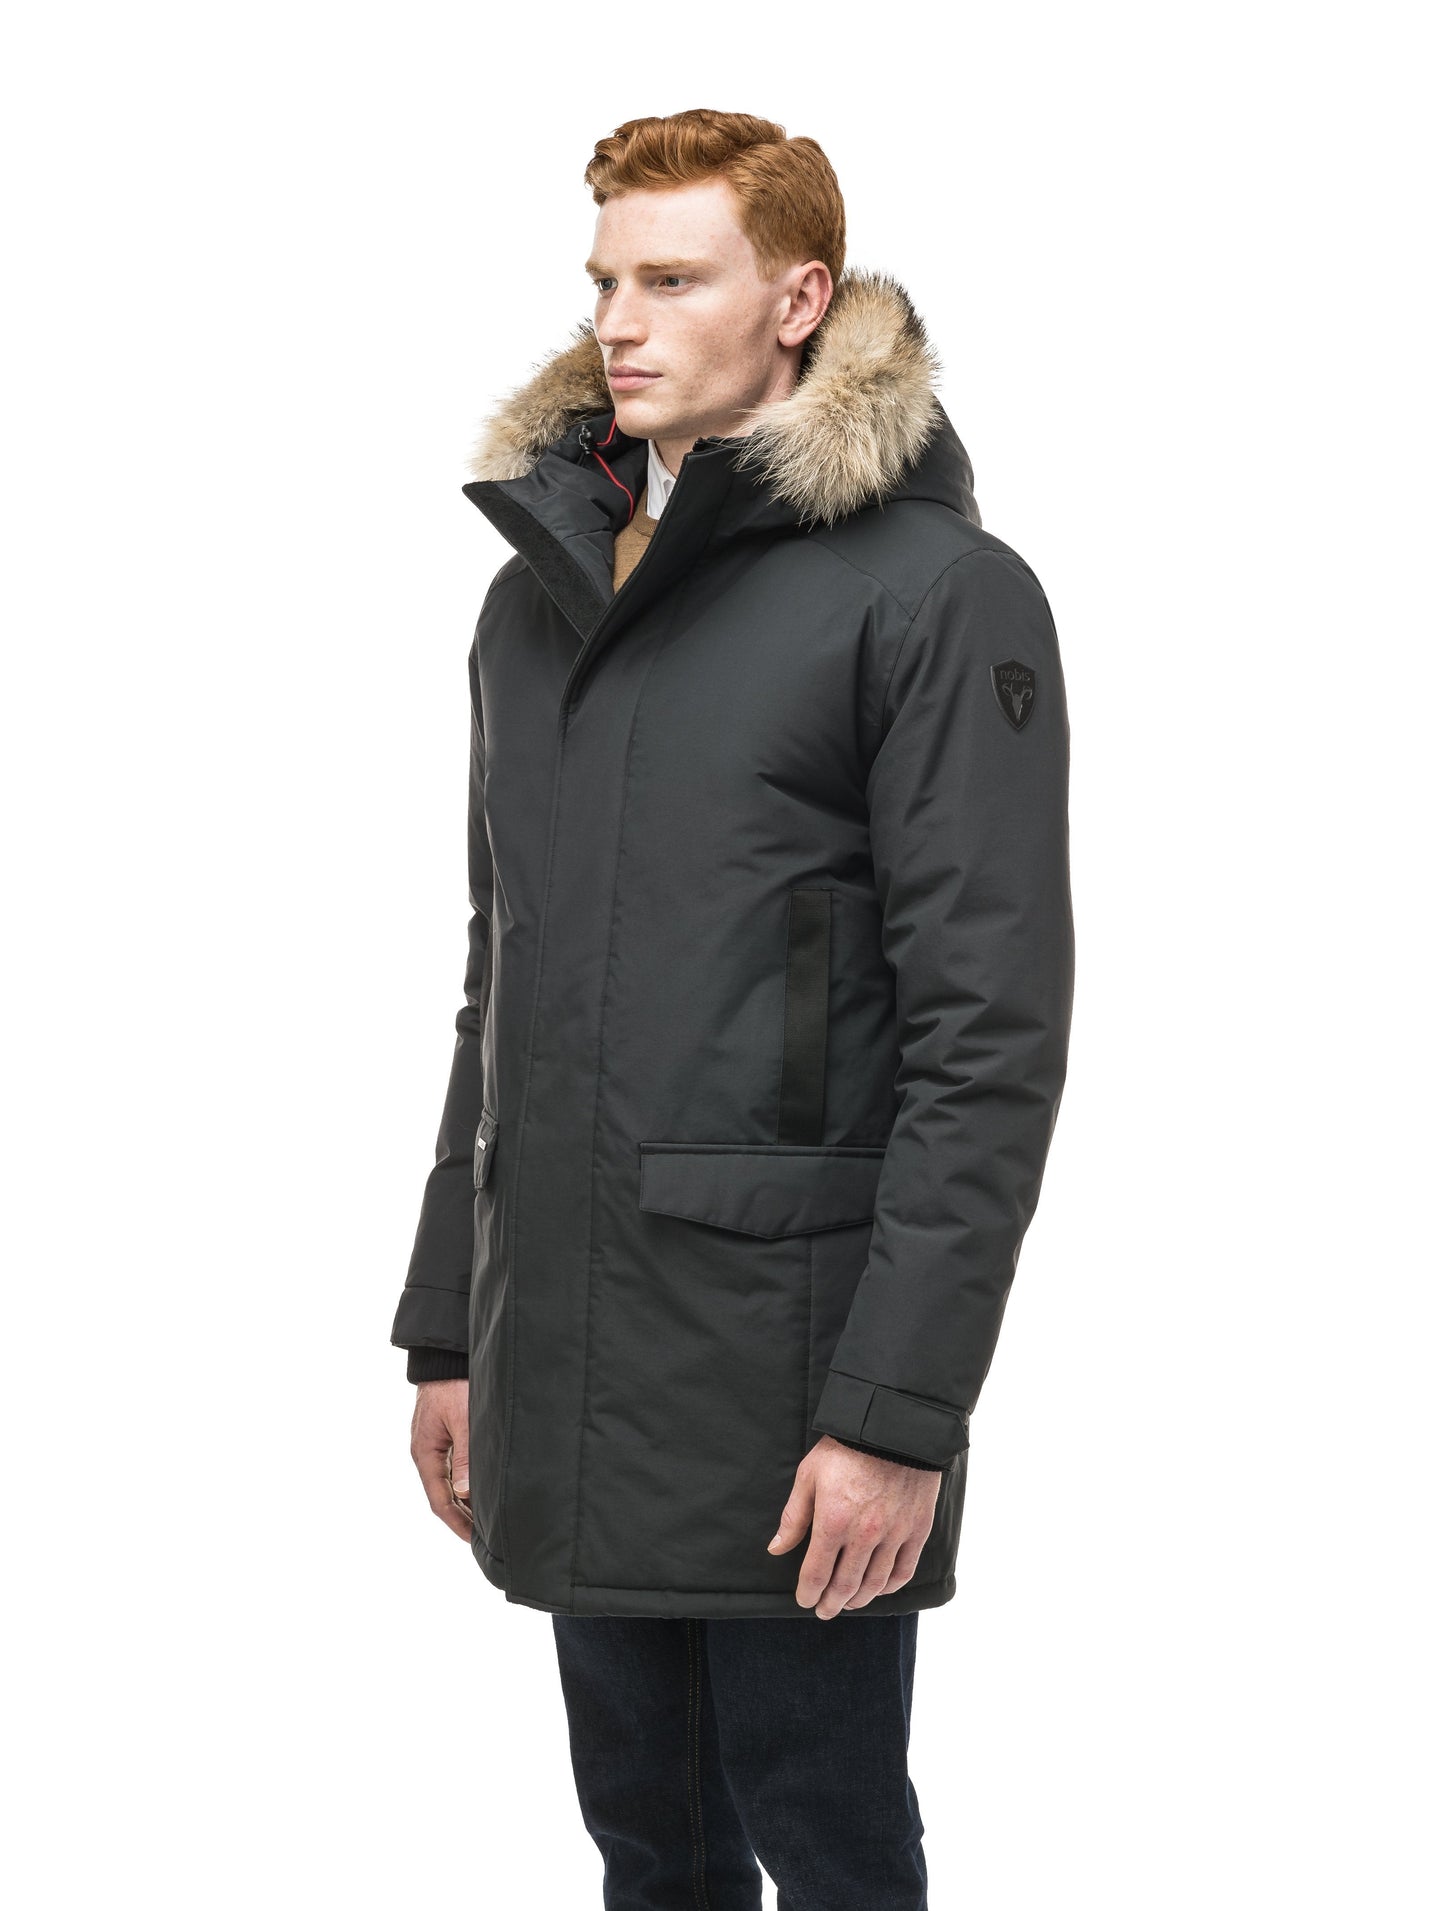 Lightweight men's parka with duck down fill and removable fur trim around the hood in Black